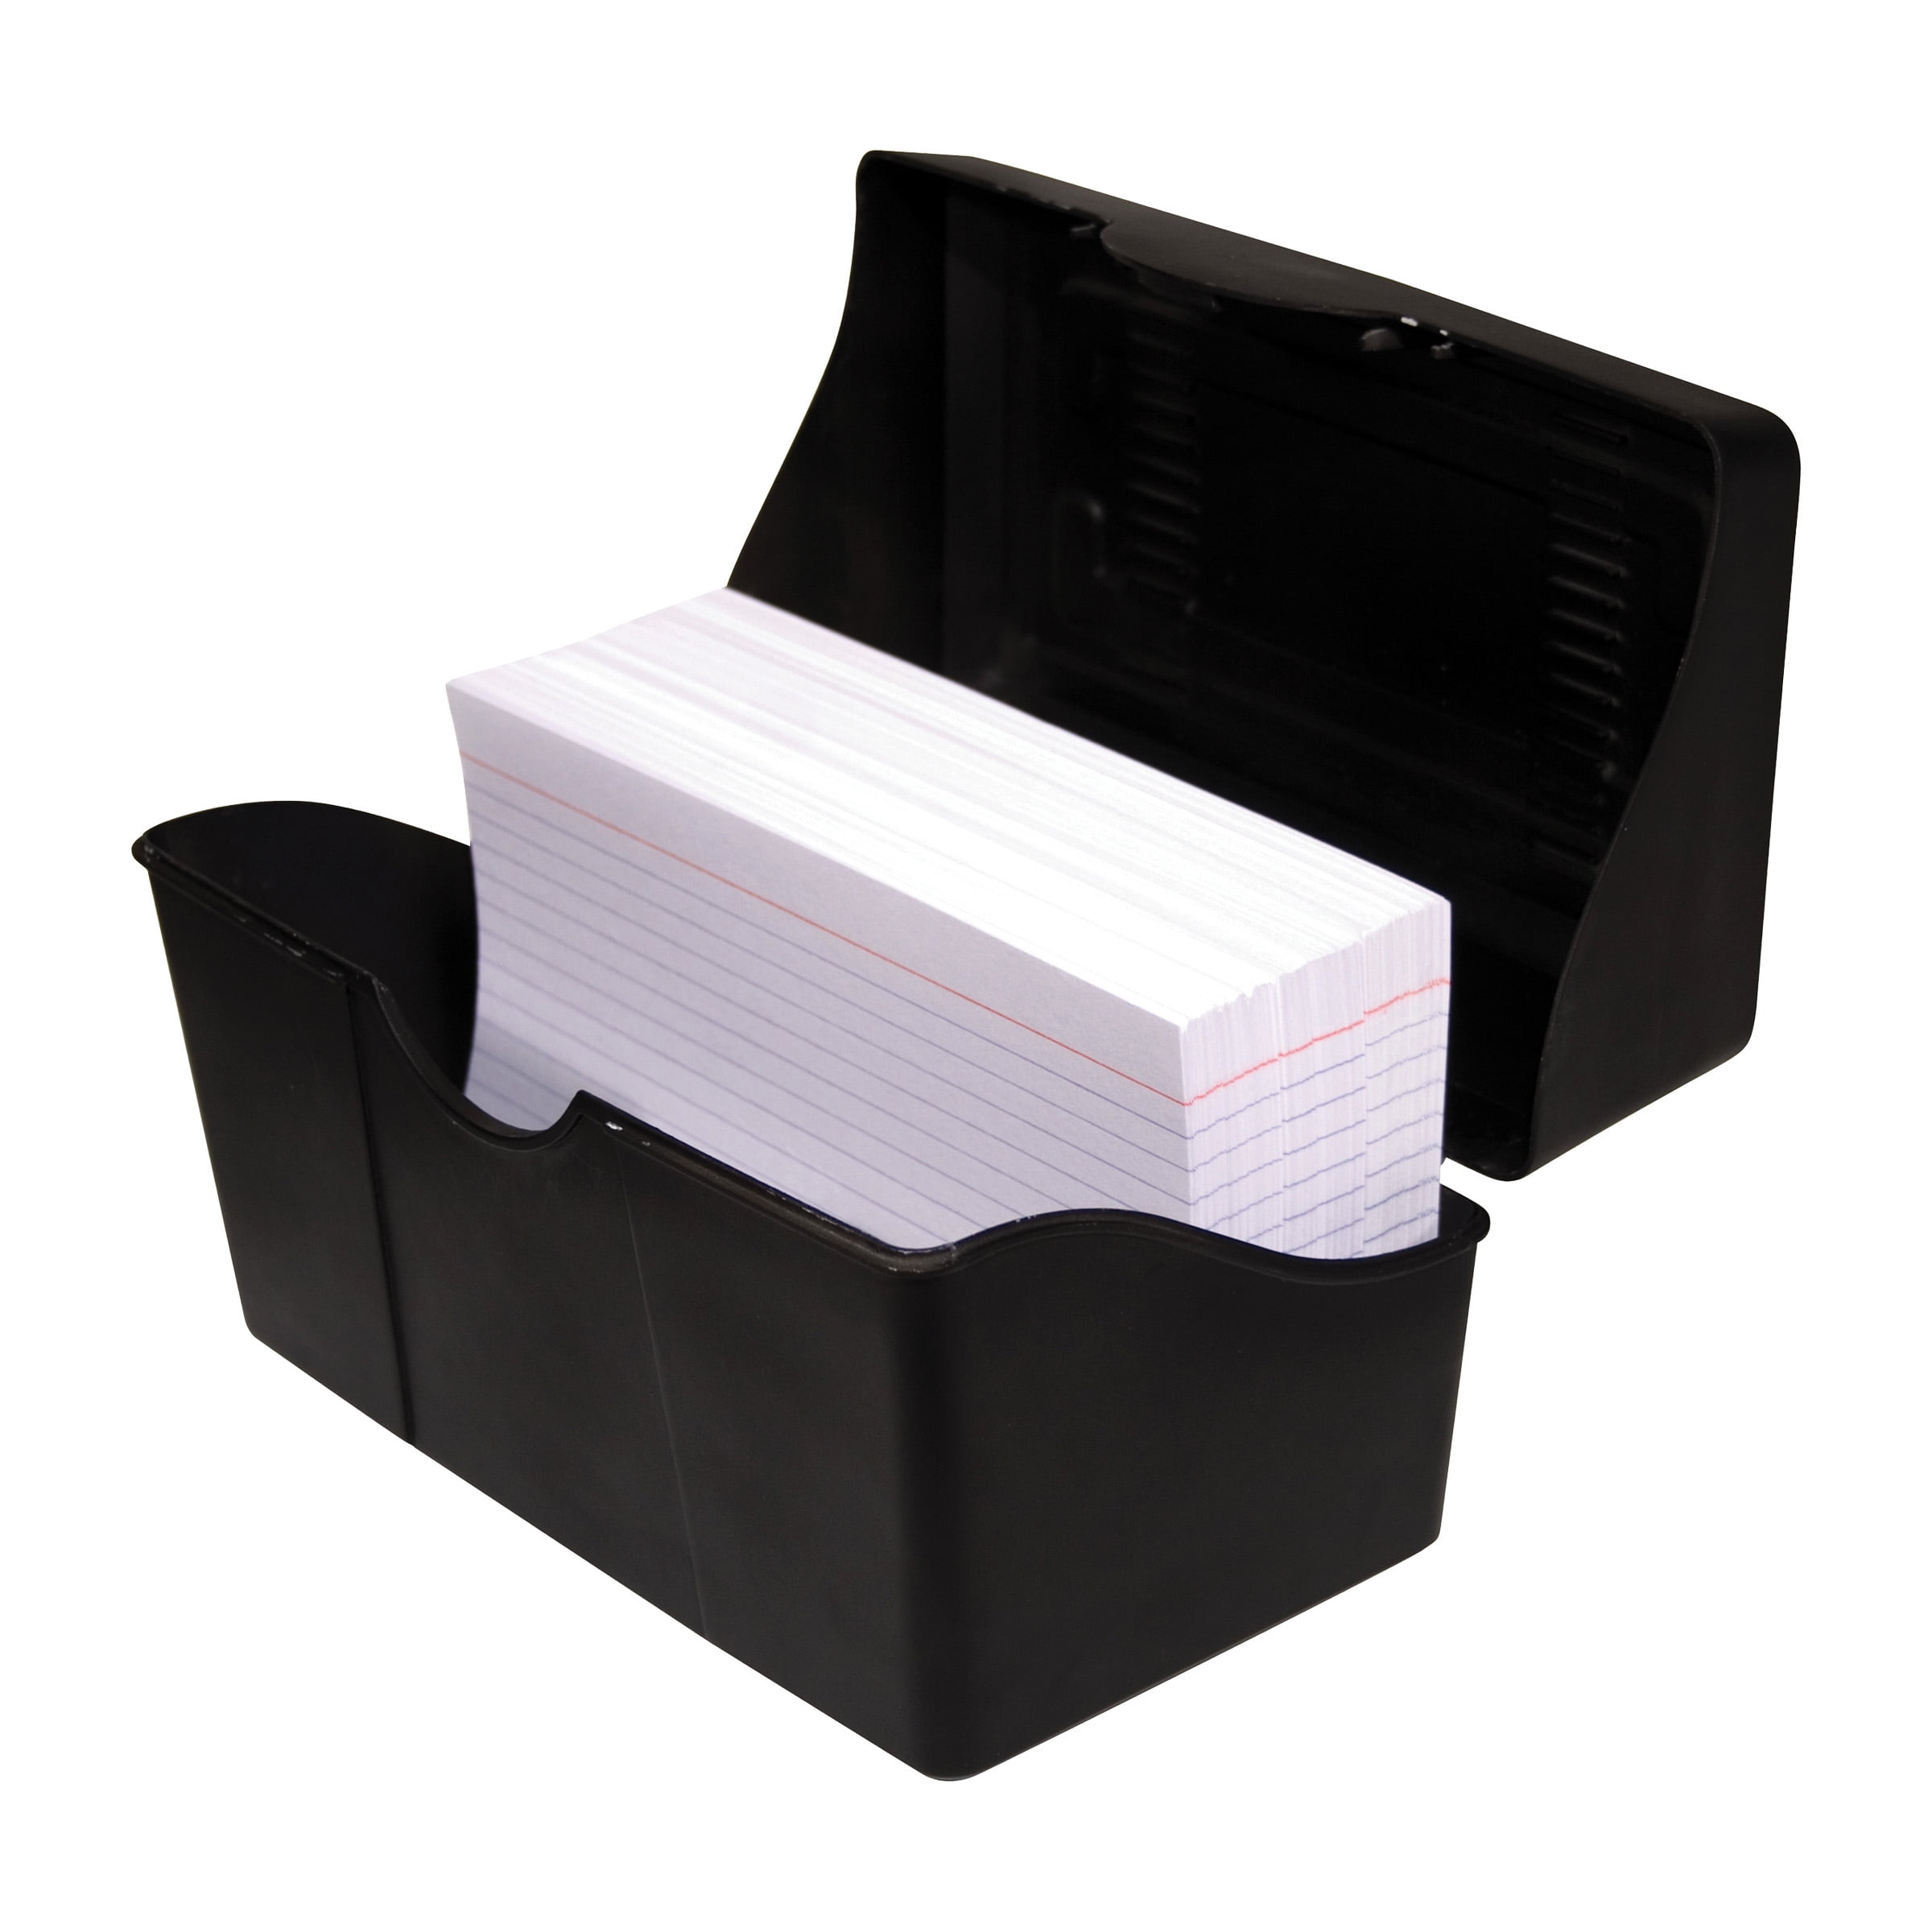  2 Pack Index Card Holder with Lock, Fireproof Index Card Box,  Collapsible Index Card Organizer, Flash Card Holder, Note Card Holder Index Card  Case Fits 1200 Flash Cards, Business, Recipe (